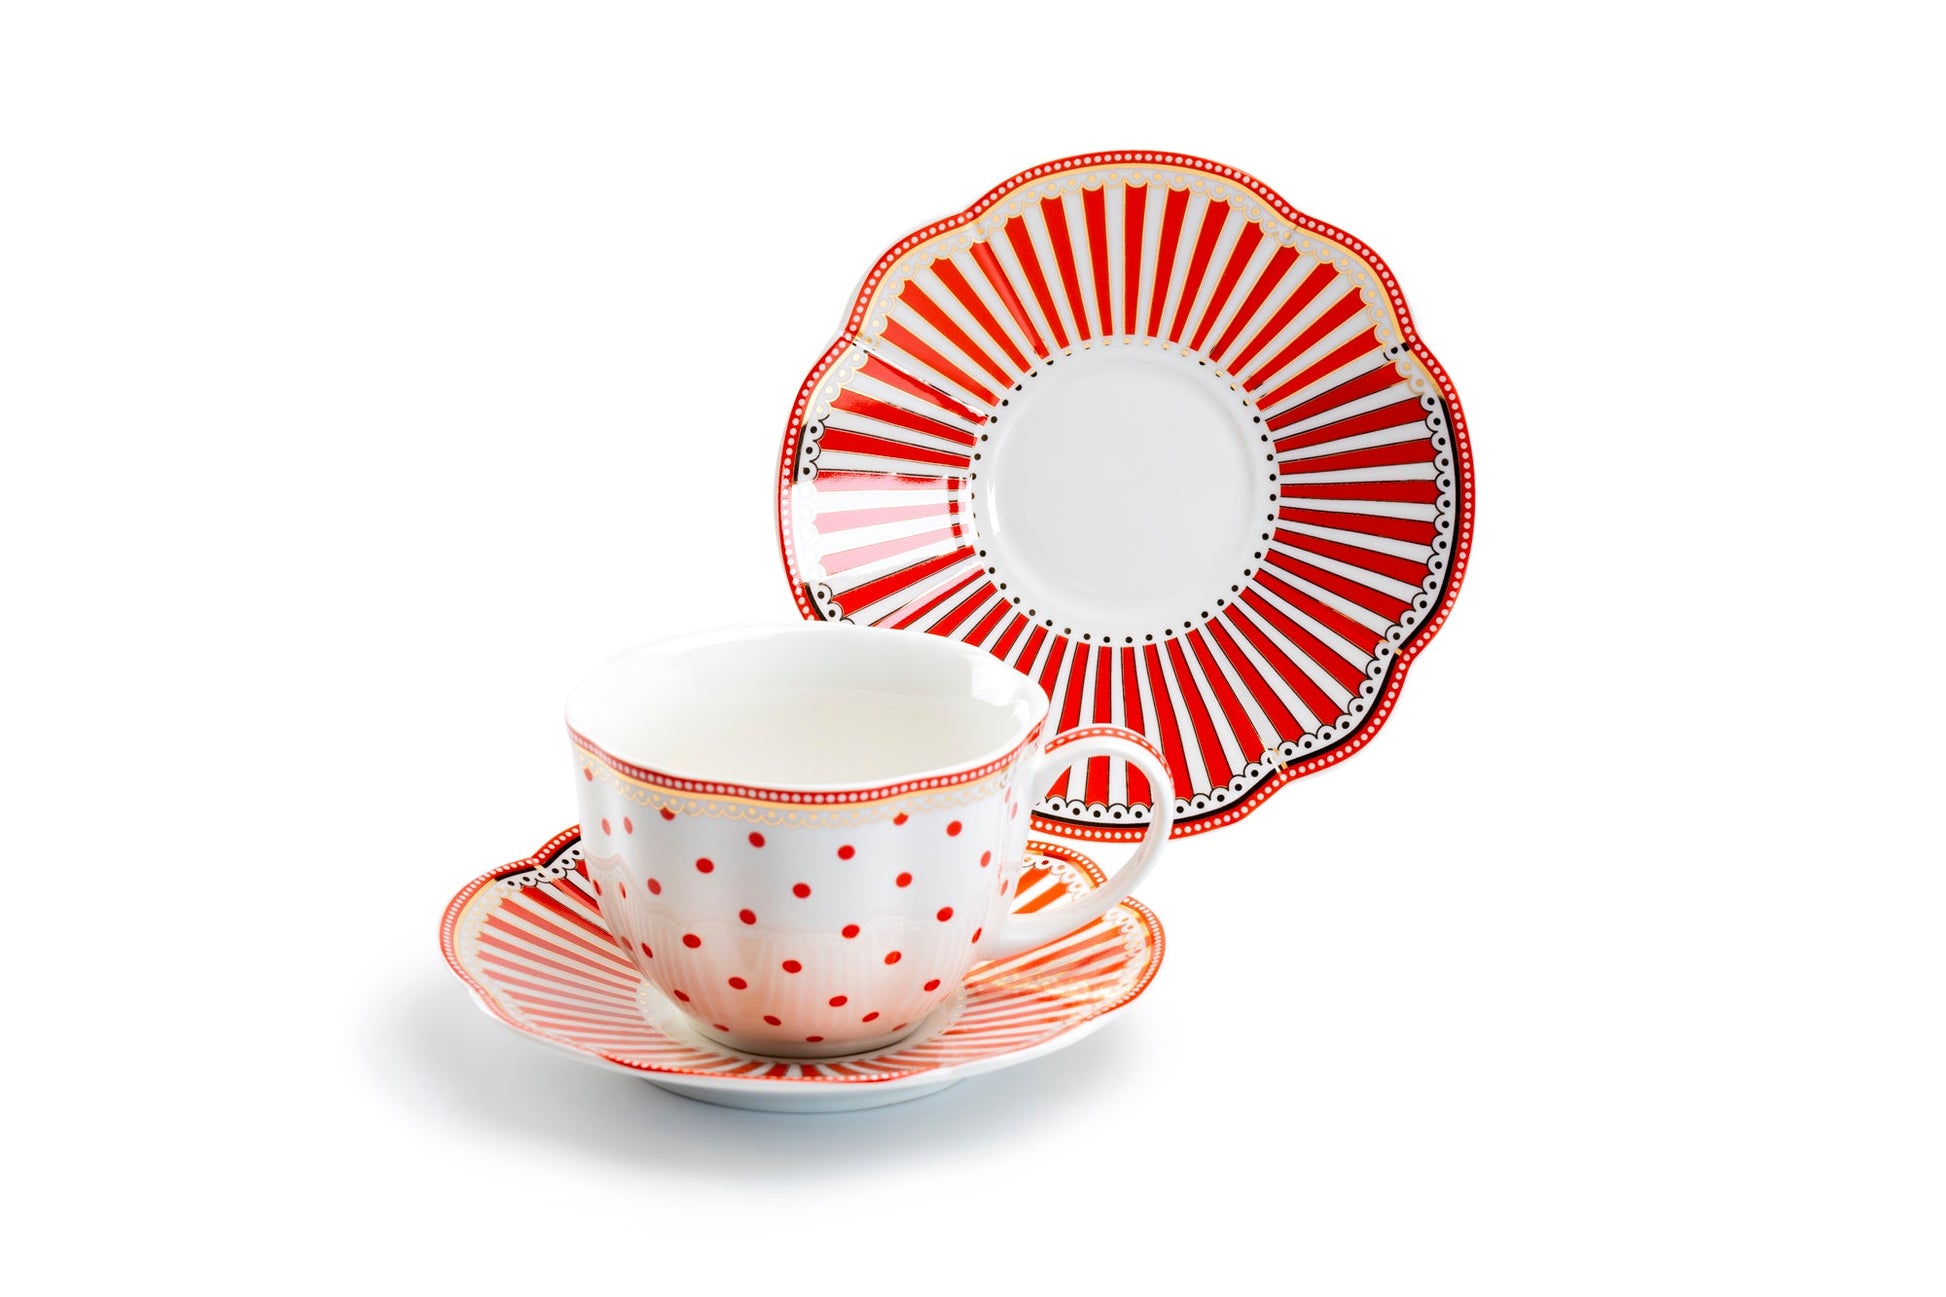 Nappe transparente Red Poppy Calitex - Blancollection